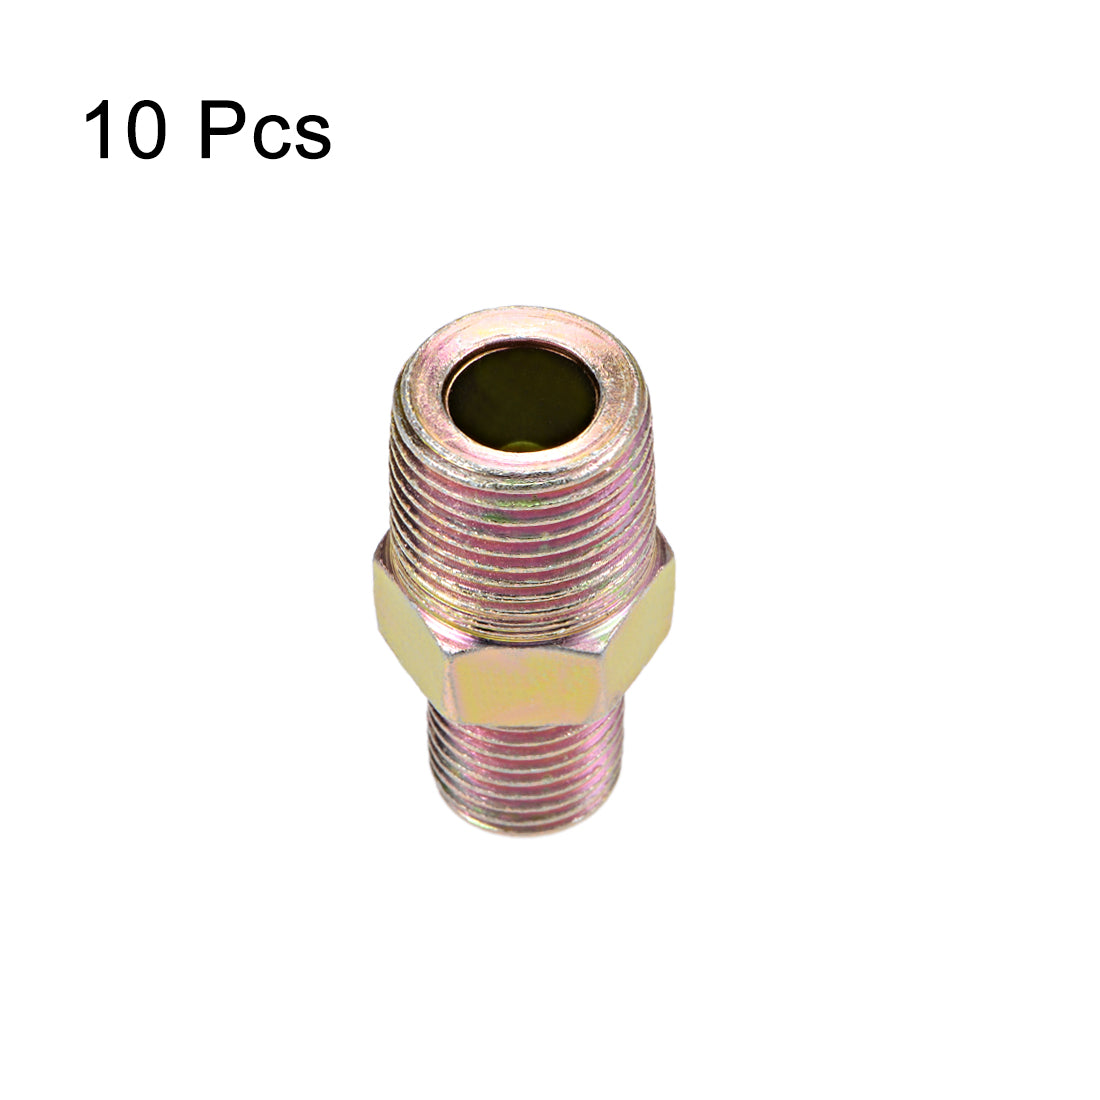 Uxcell Uxcell Reducing Pipe Fitting Reducer Hex 1/8 NPT x 1/4 BSP Male 10Pcs